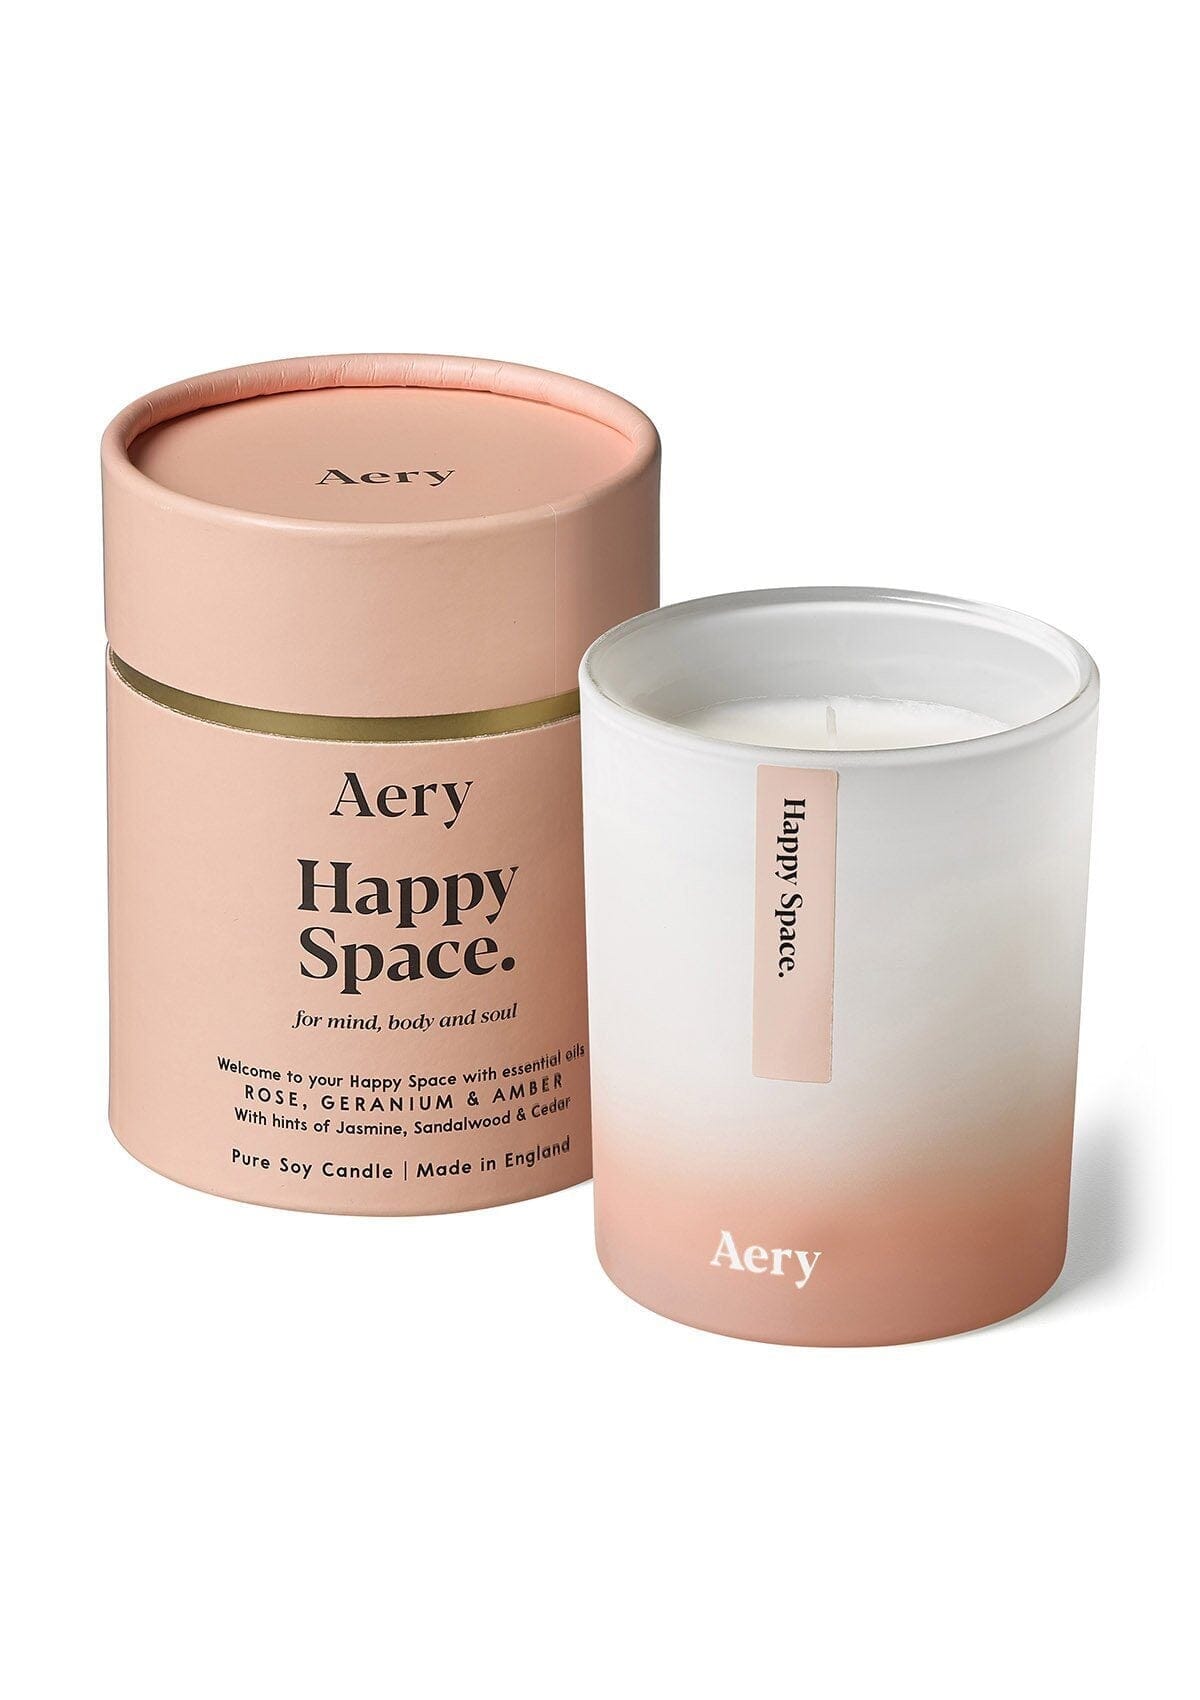 aery living happy space scented candle next to pink product packaging